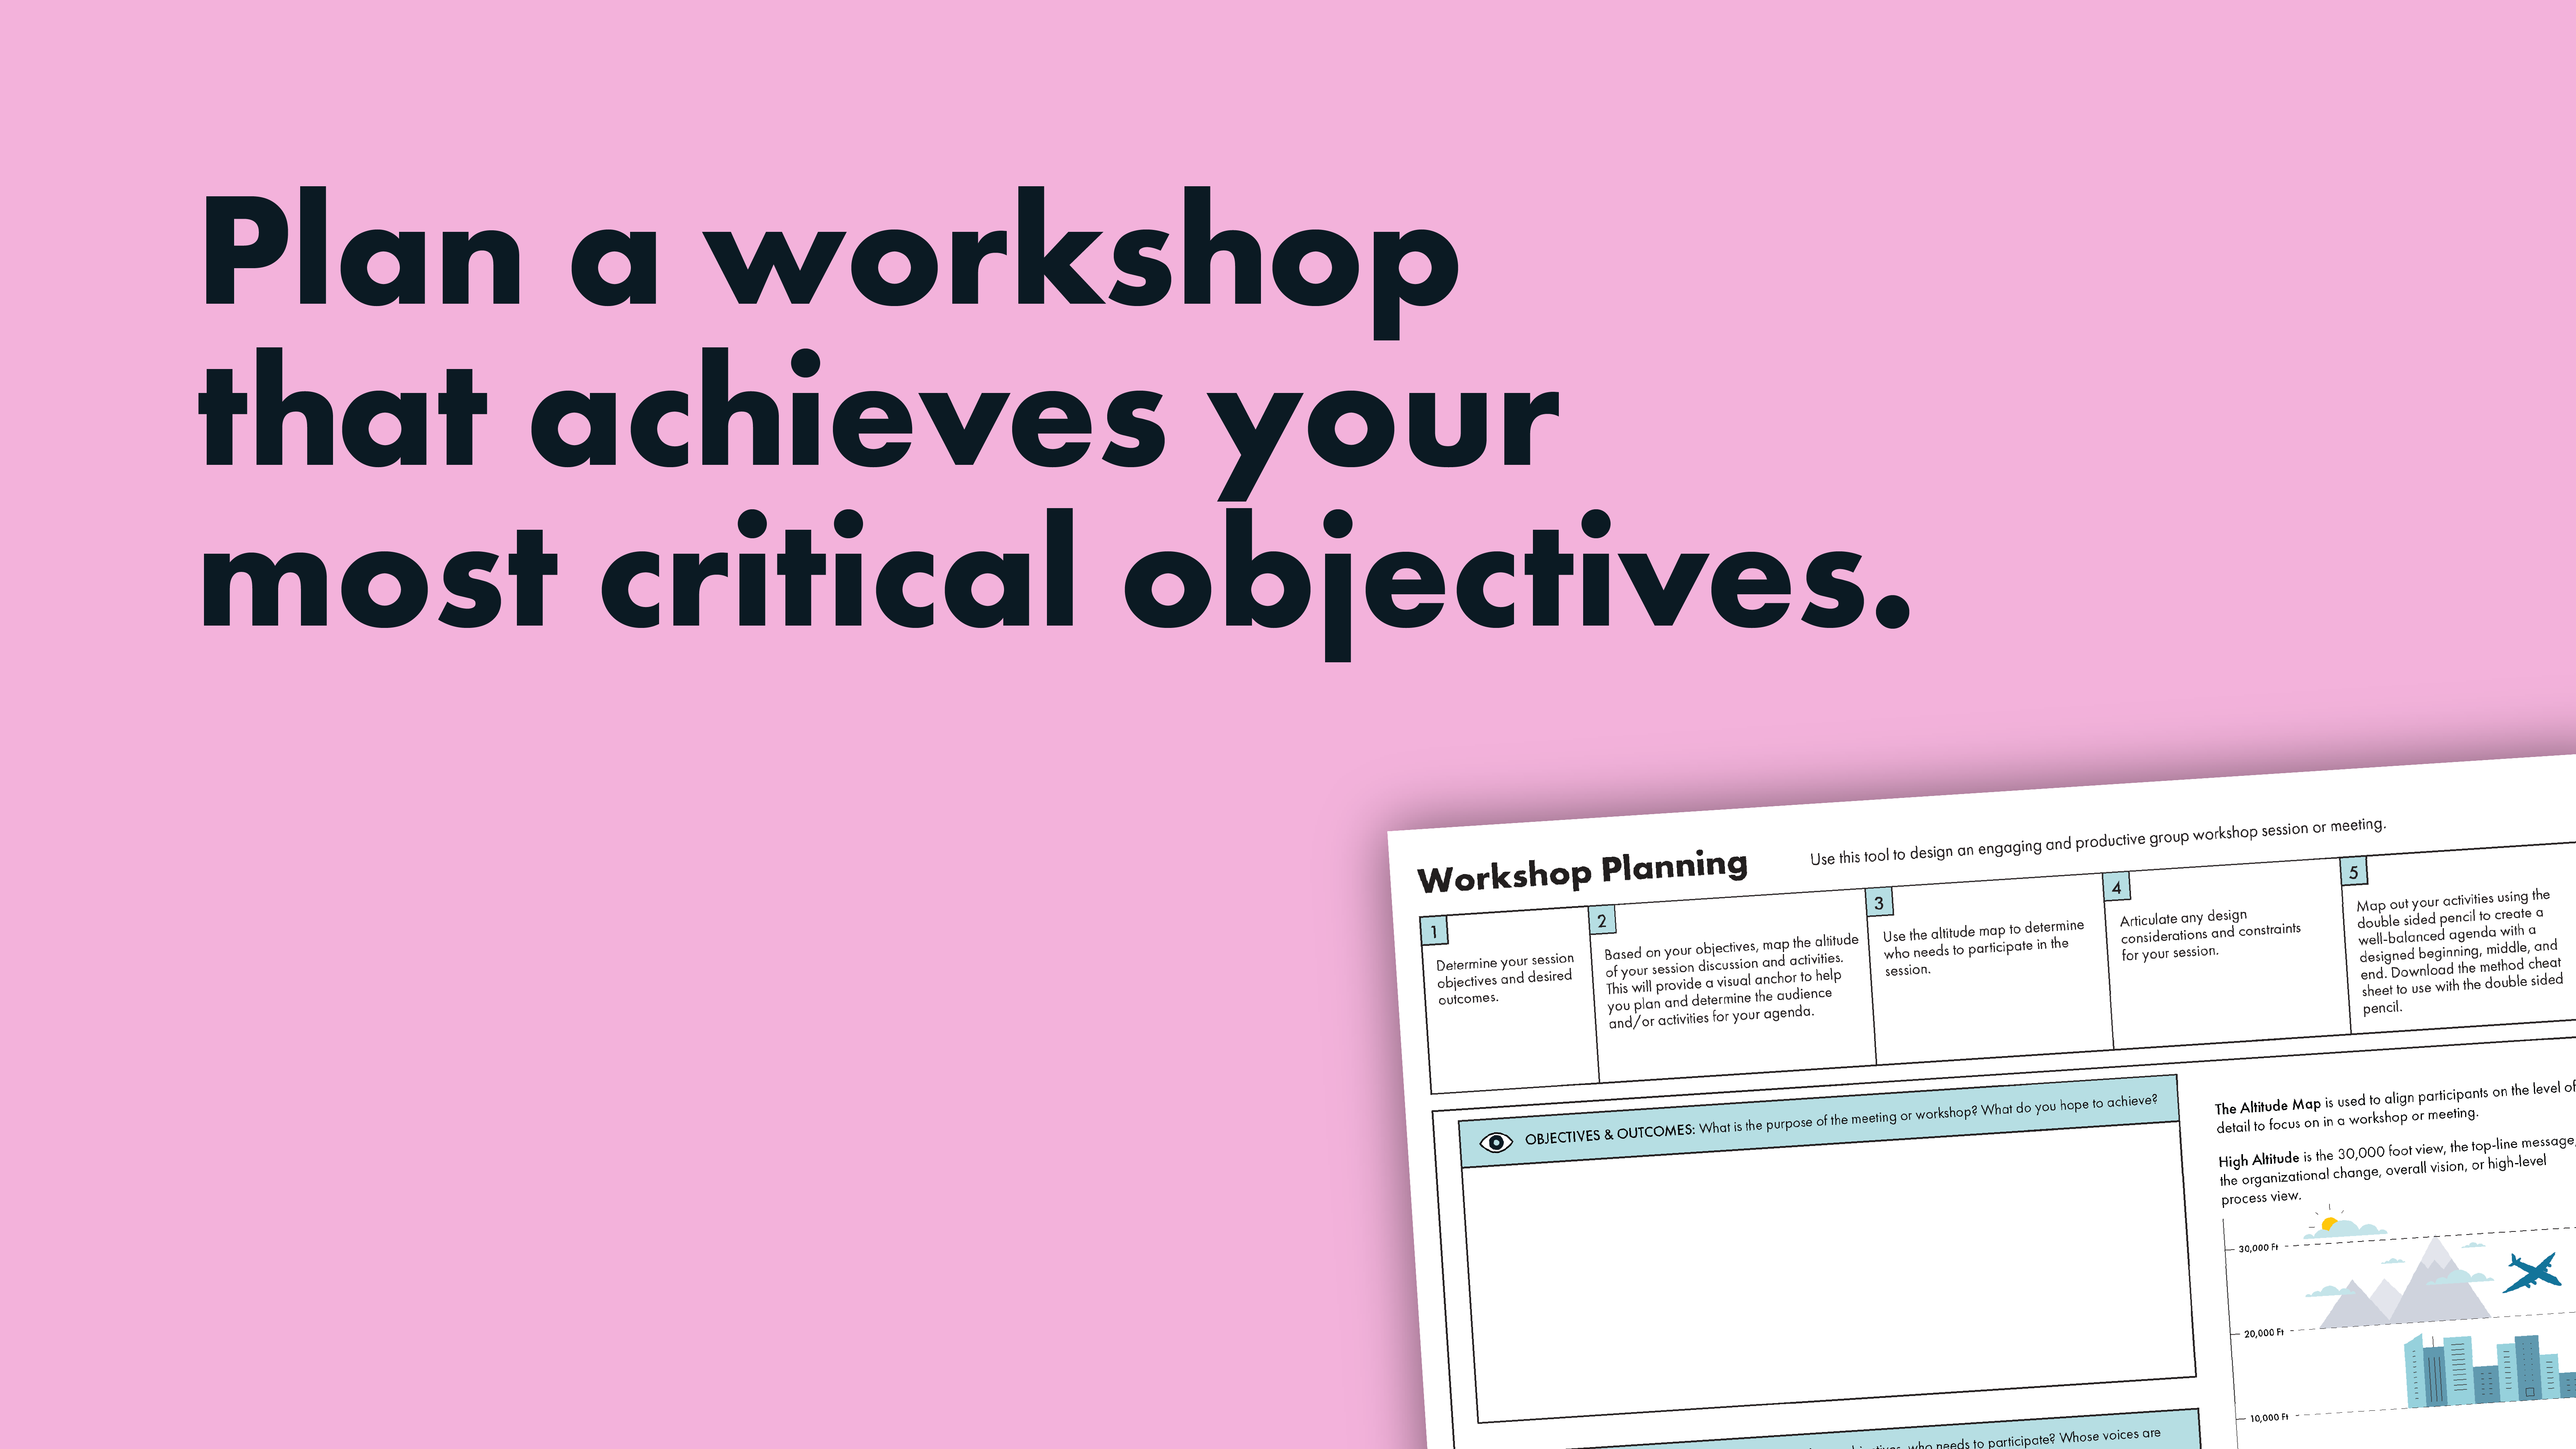 Text reading "Plan a workshop that achieves your most critical objectives." This is besides the canvas available for download.